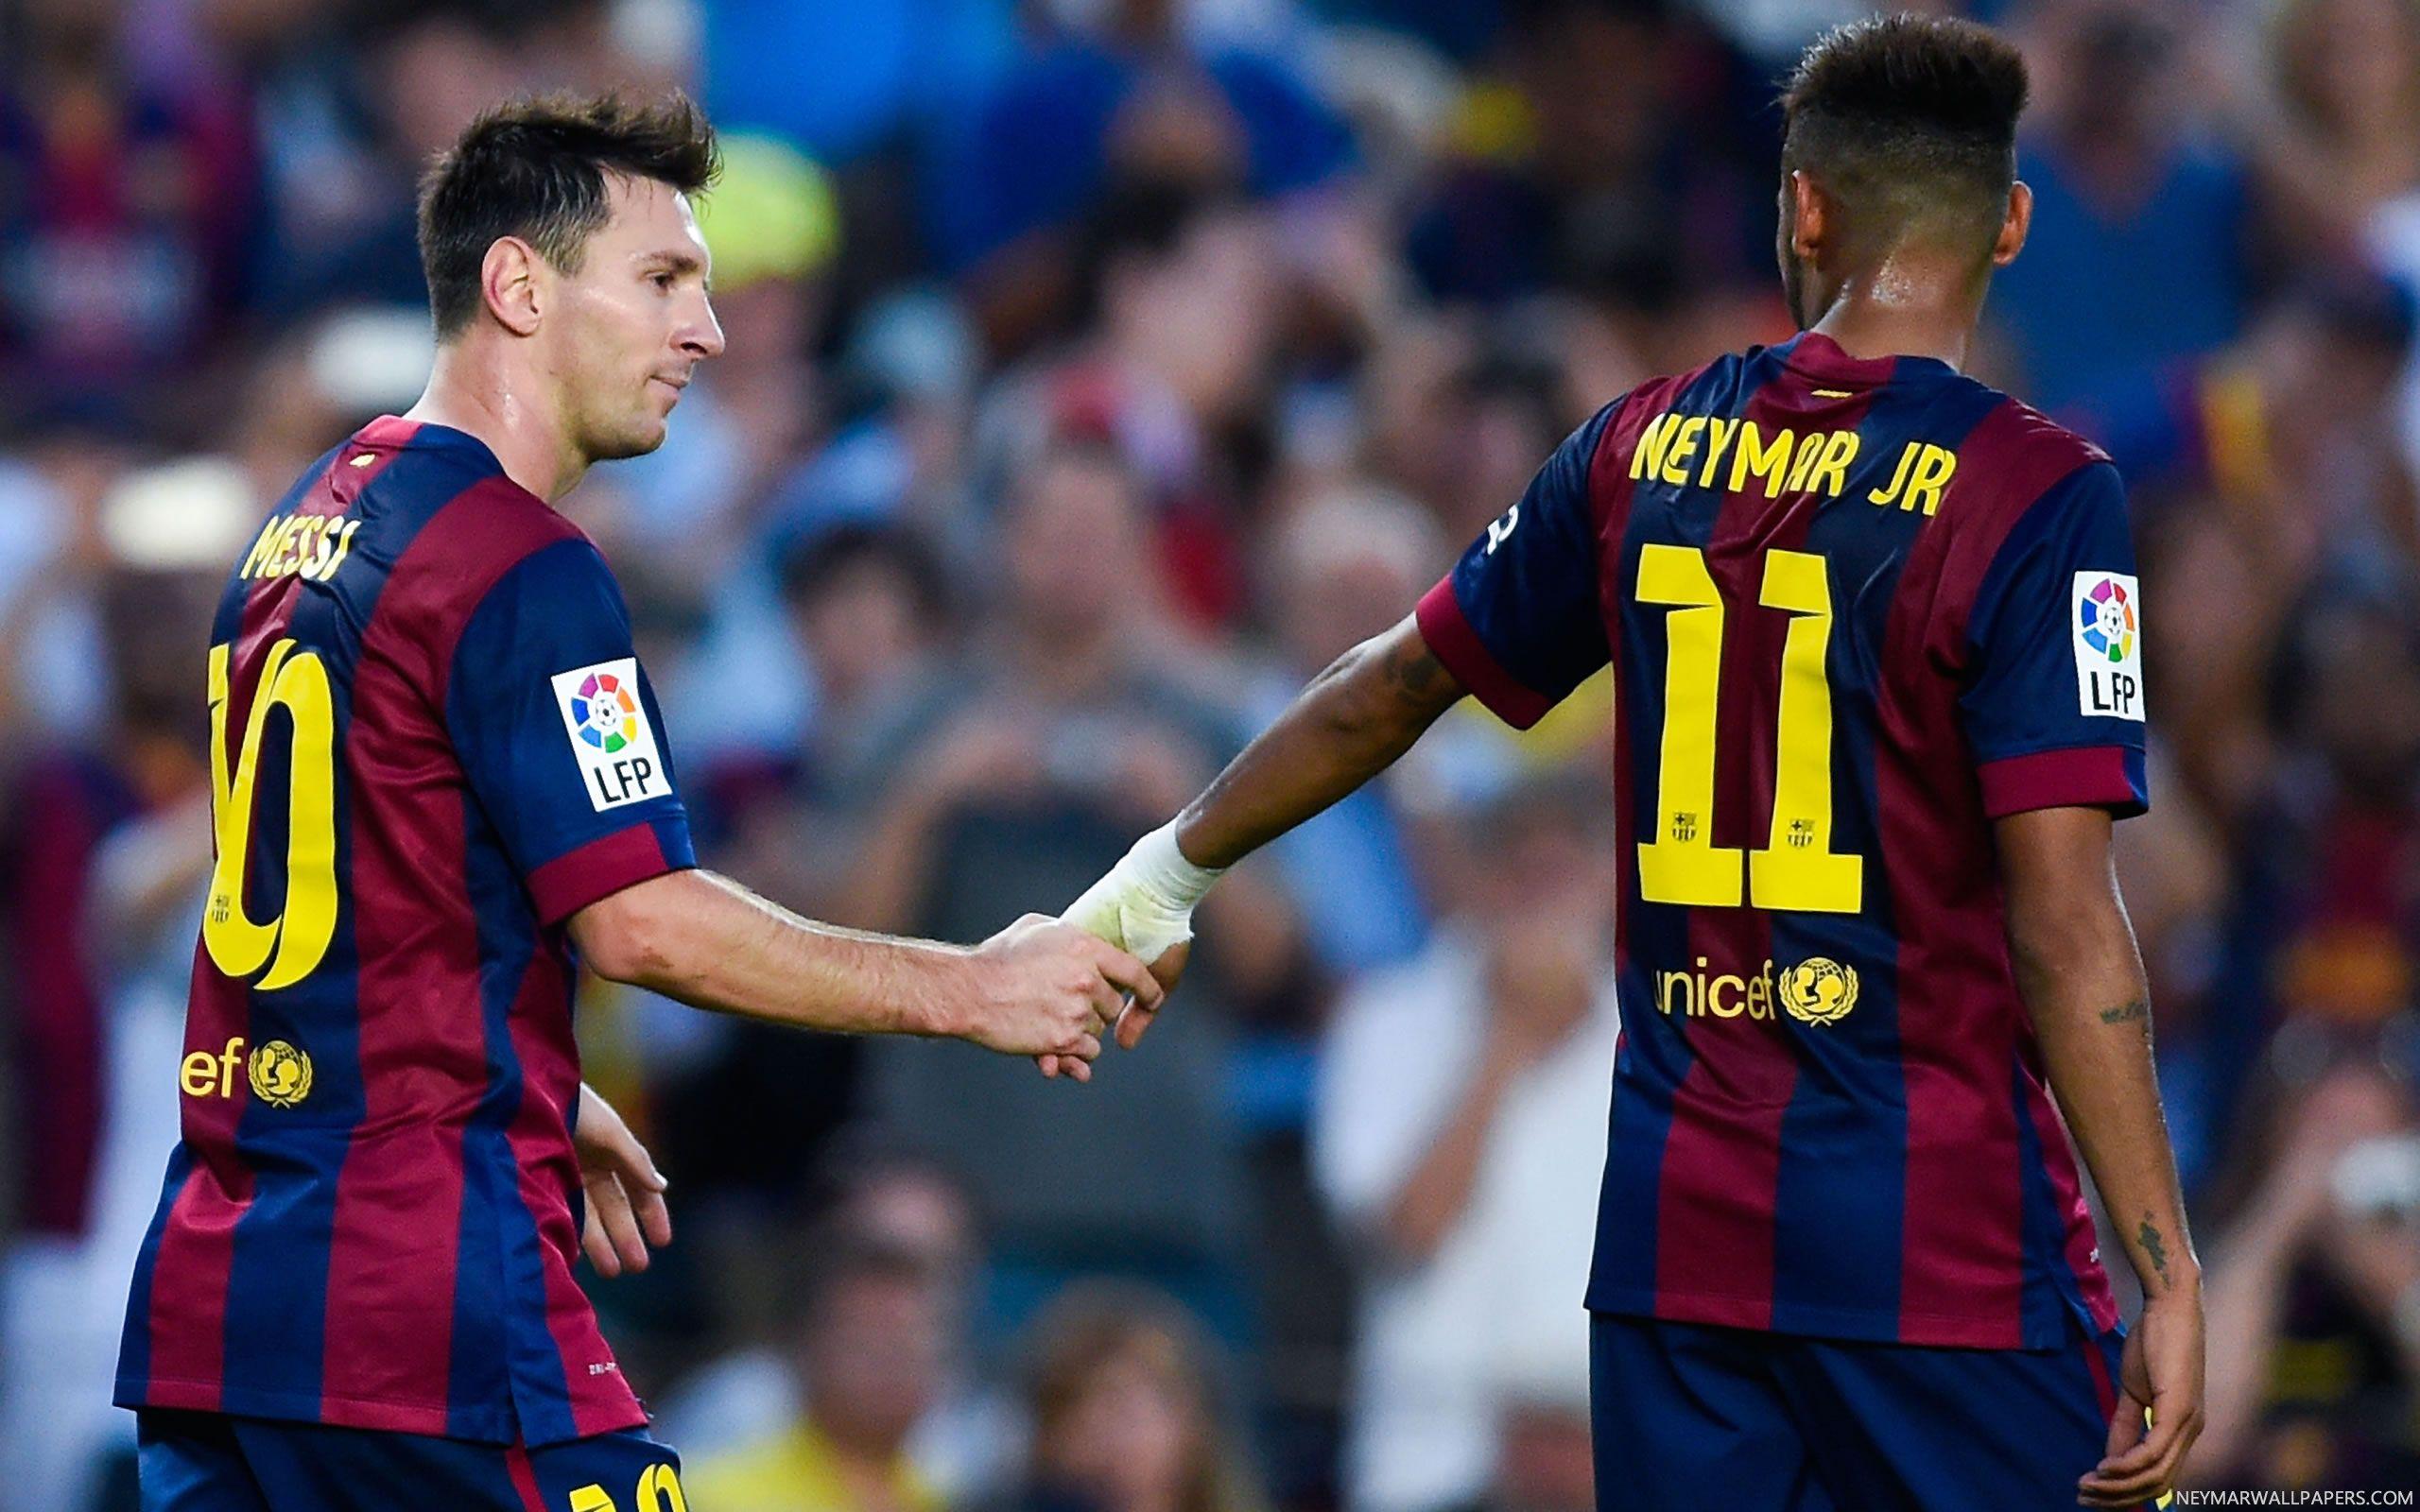 Neymar and Messi holding hands